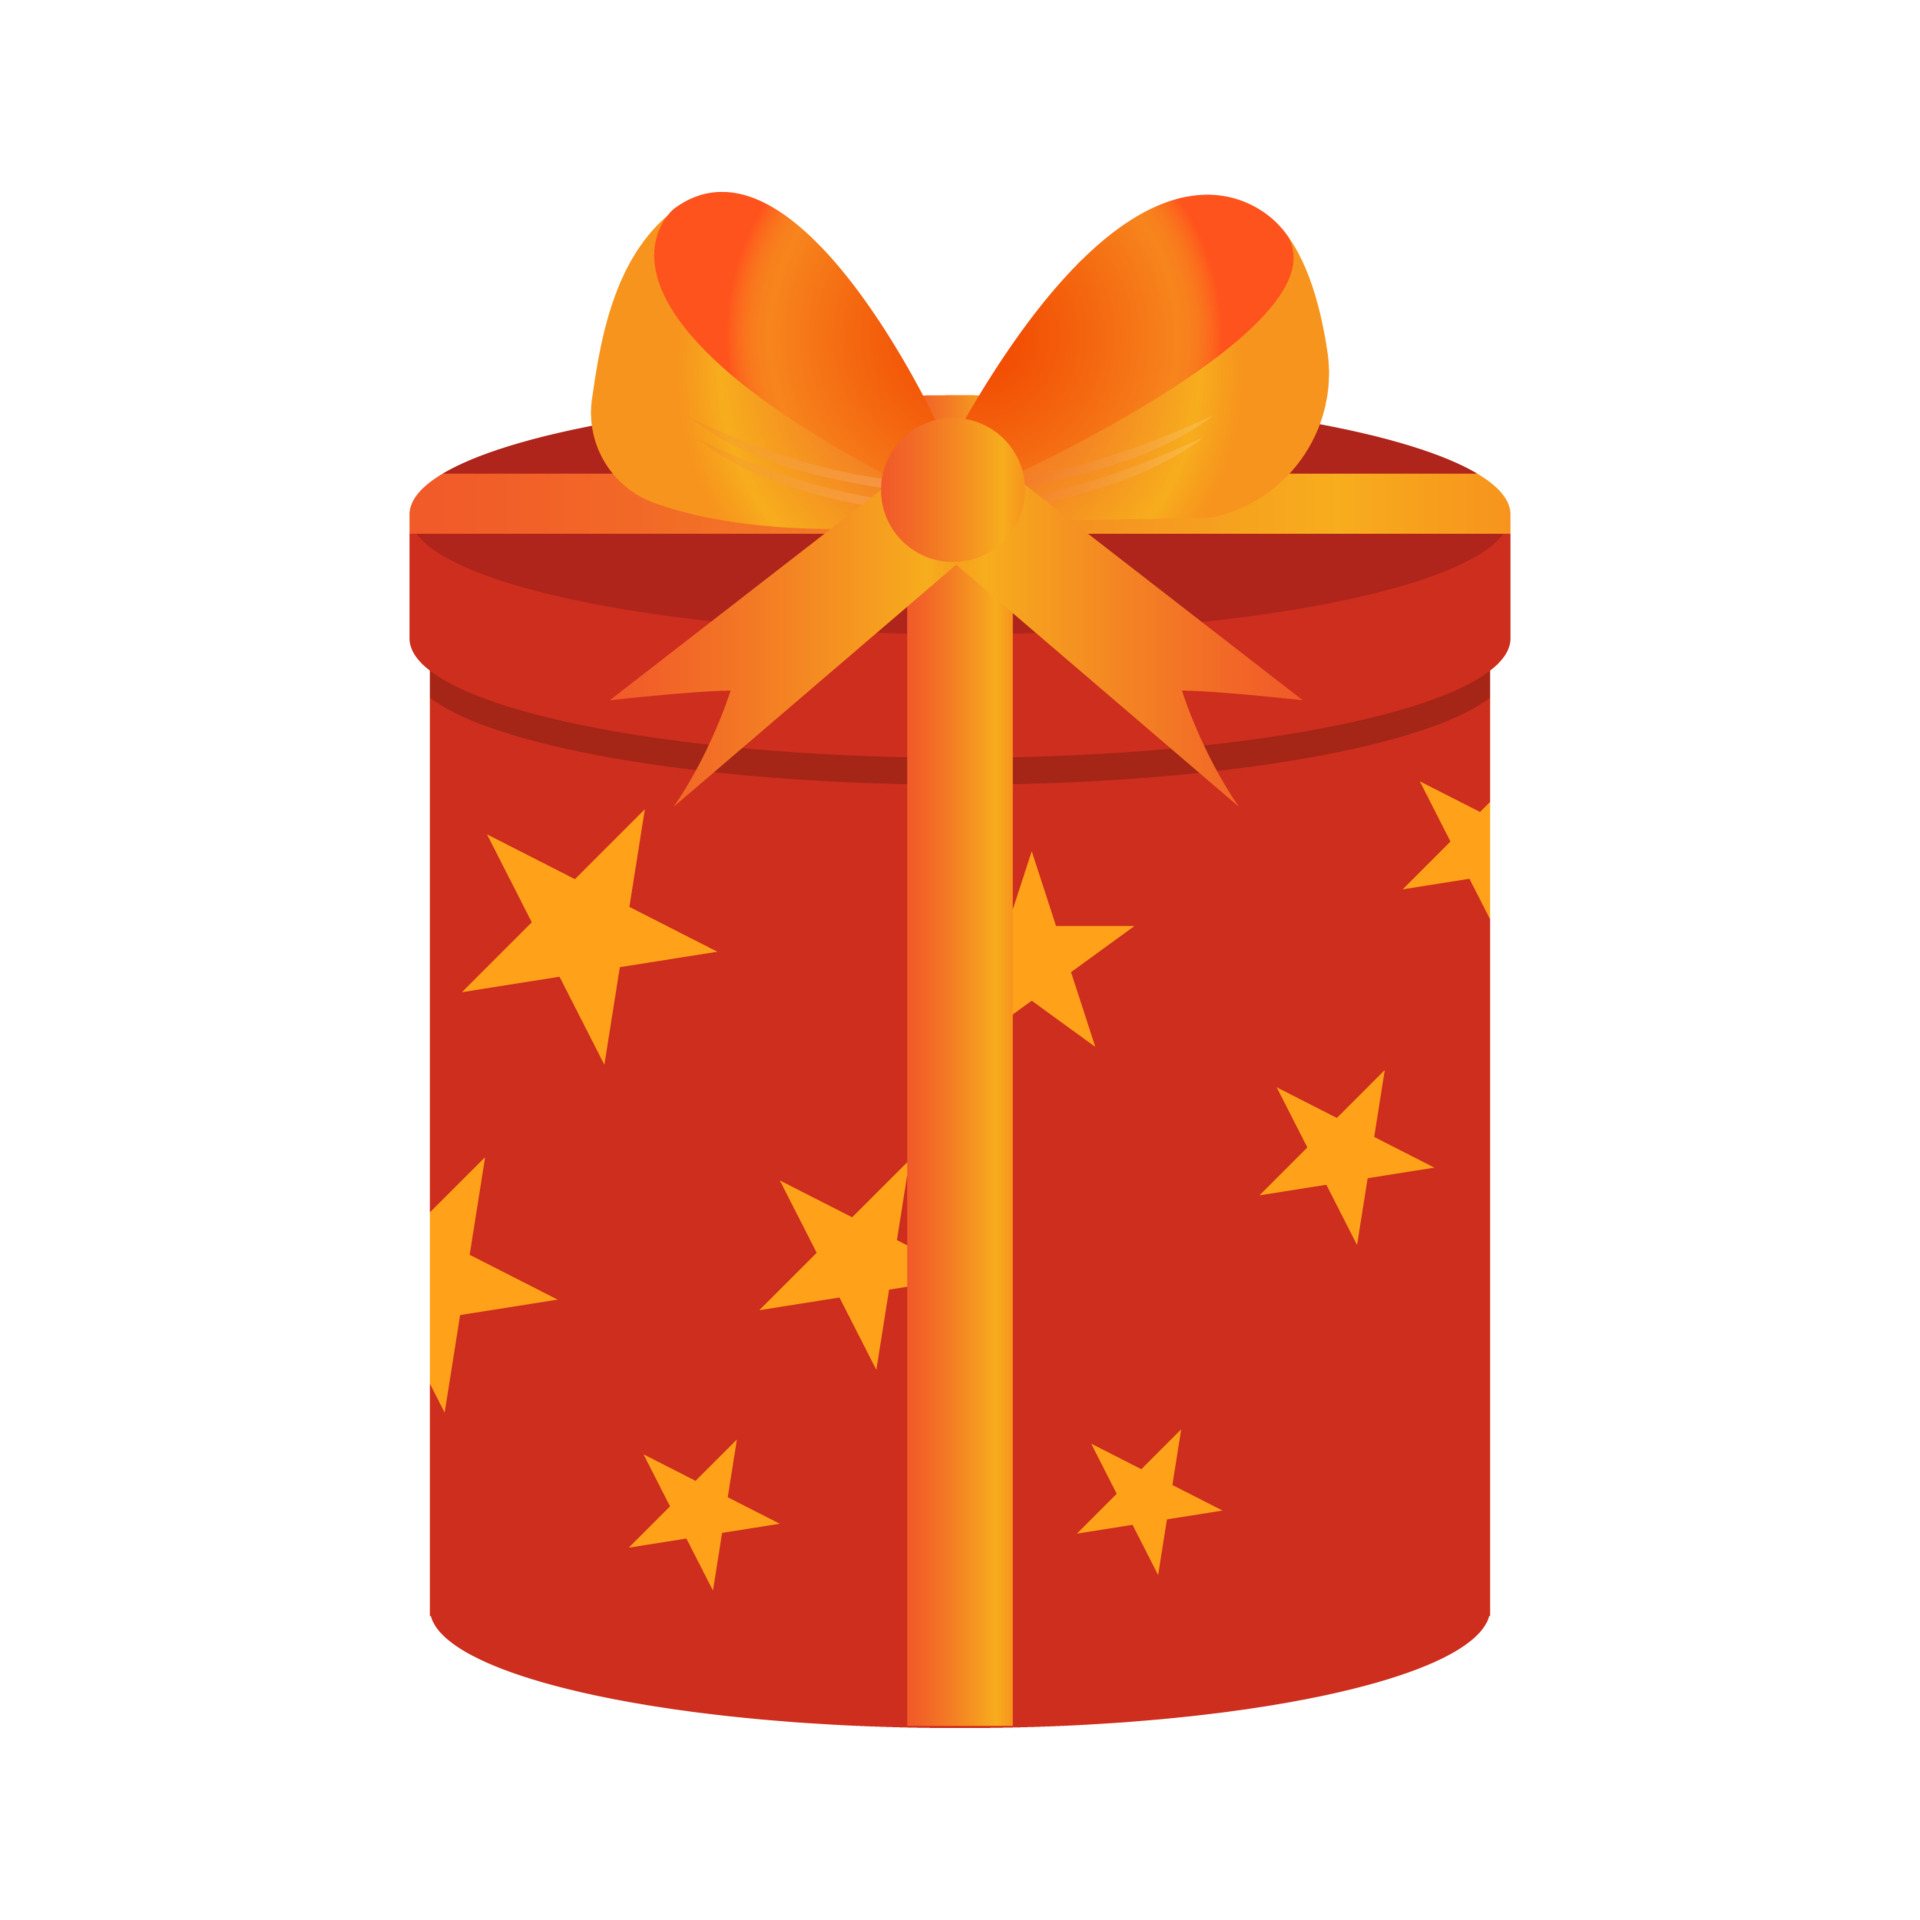 Round gift box PNG image with a dark red color wrap paper and orange color  ribbon. Christmas gift PNG on a transparent background. Gift images for  Birthdays, anniversaries, or Christmas events design